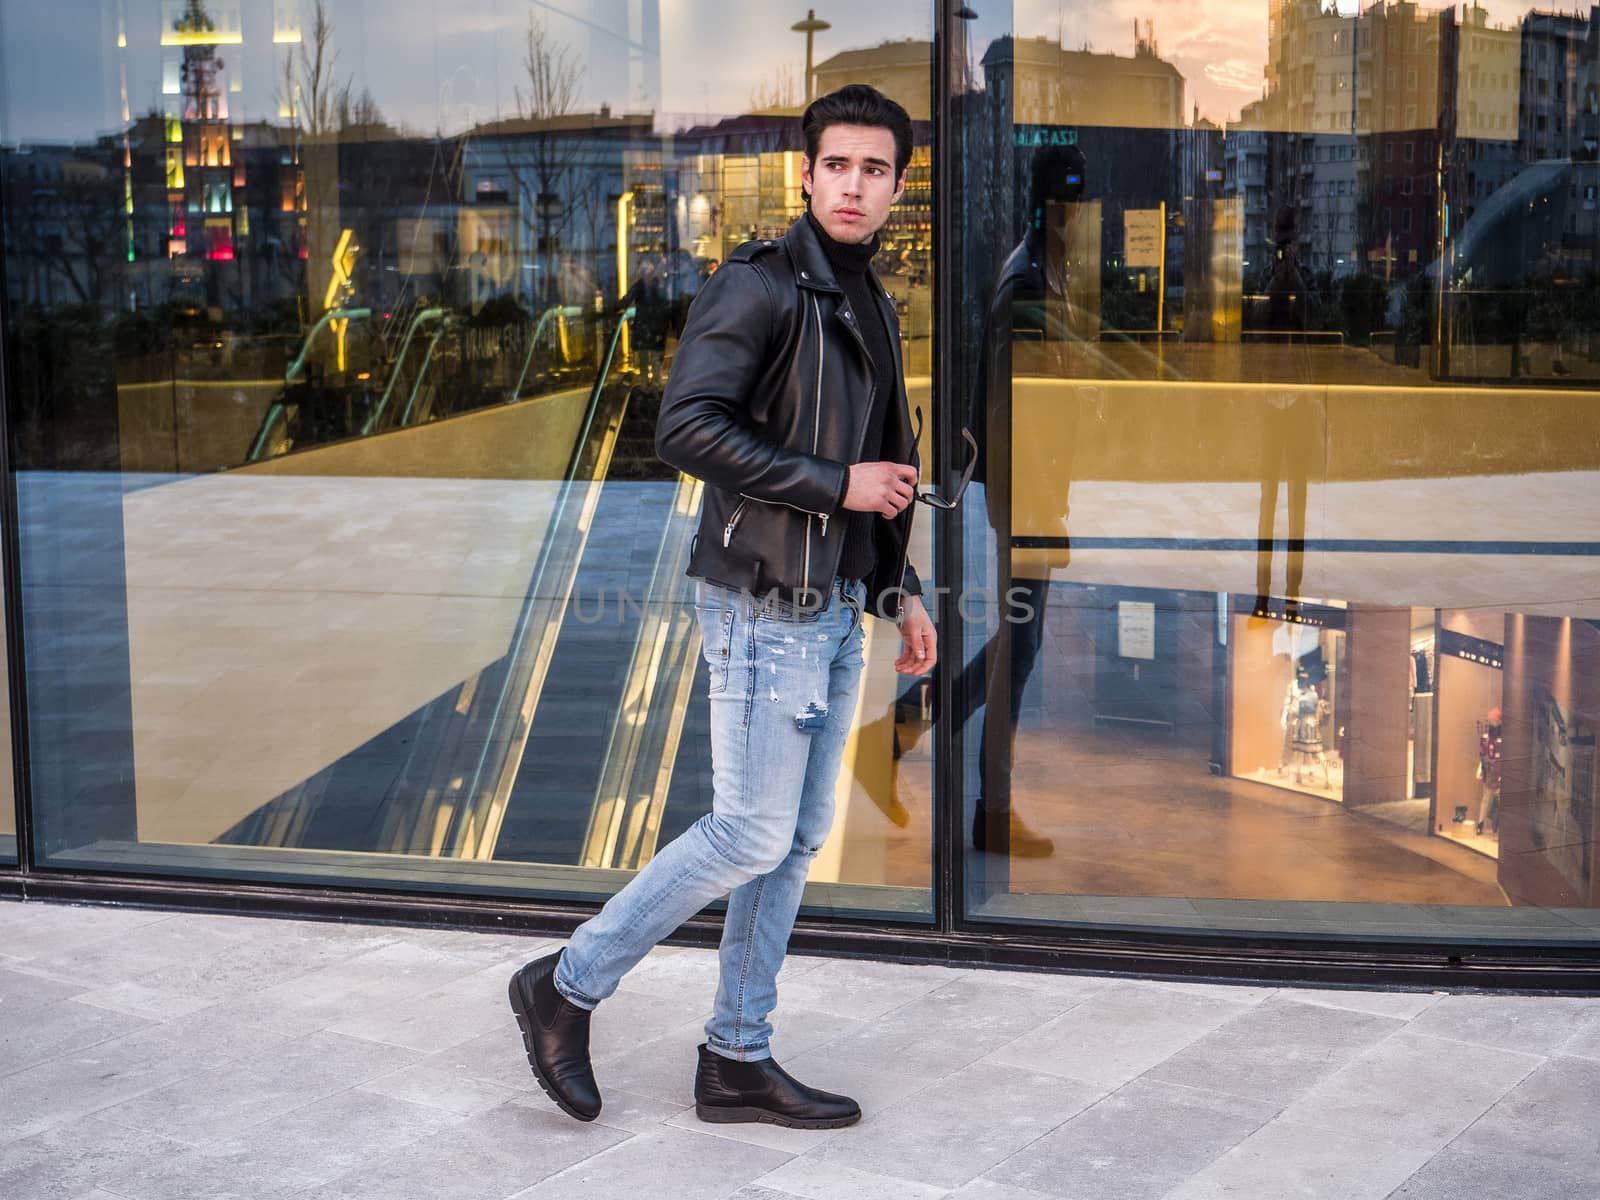 One handsome young man in modern city setting by artofphoto